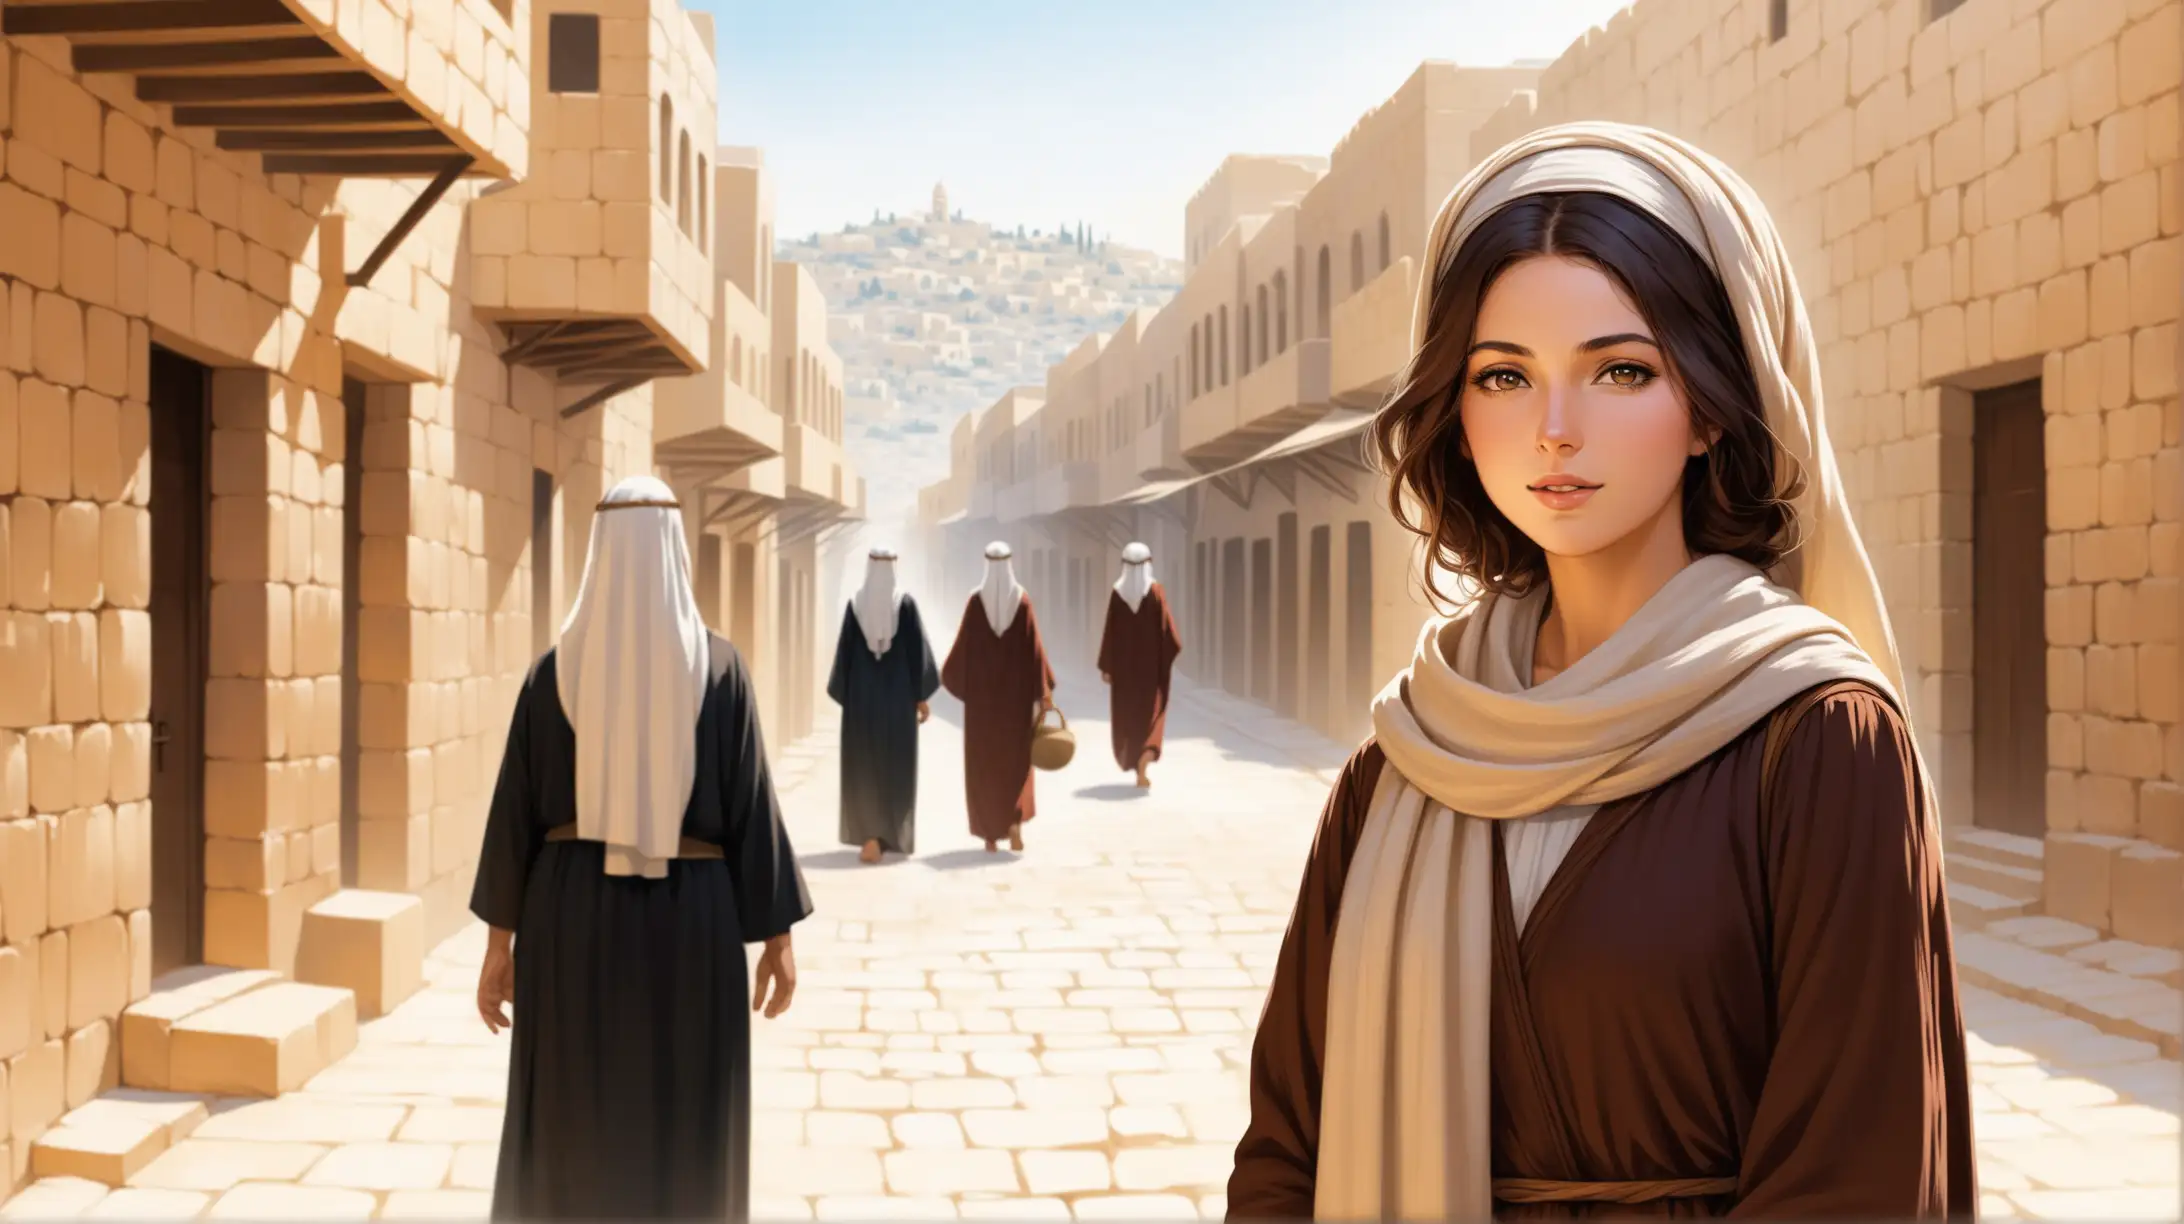 Hebrew Woman in Traditional Attire Amidst Ancient Cityscape